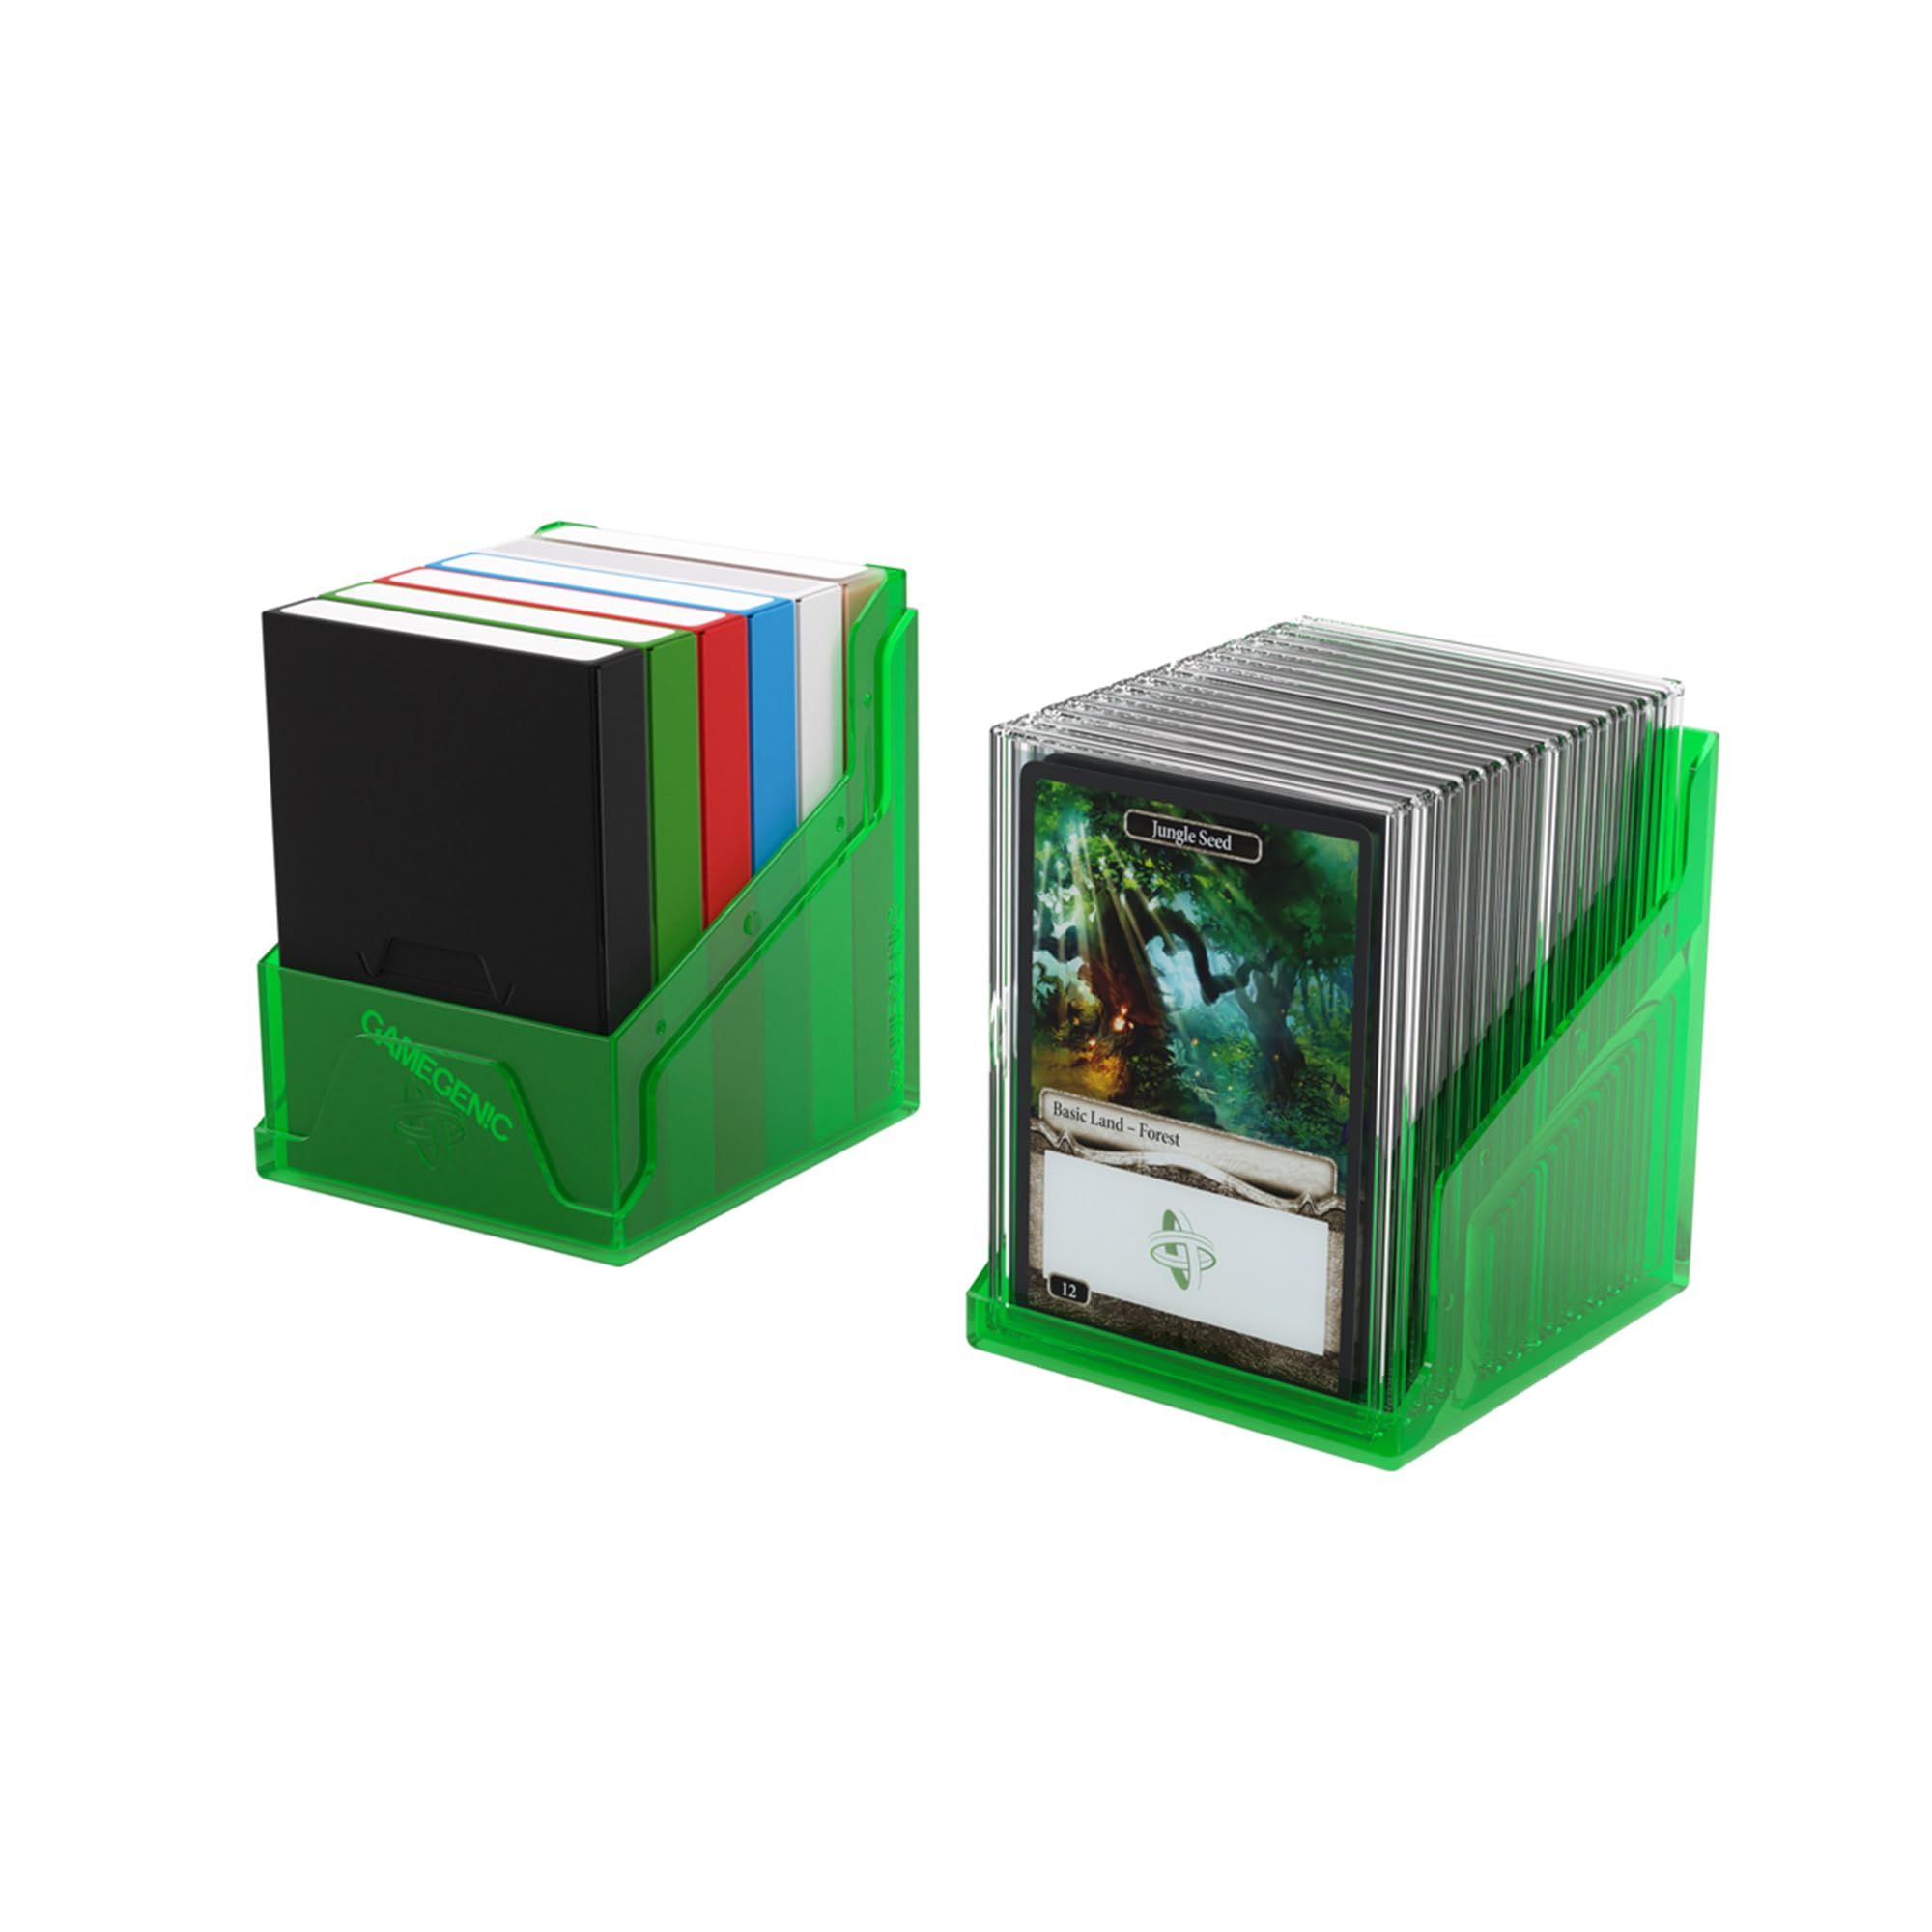 Gamegenic Bastion 100+ XL Deck Box - Compact, Secure, and Perfectly Organized for Your Trading Cards! Safely Protects 100+ Double-Sleeved Cards, Green Color, Made